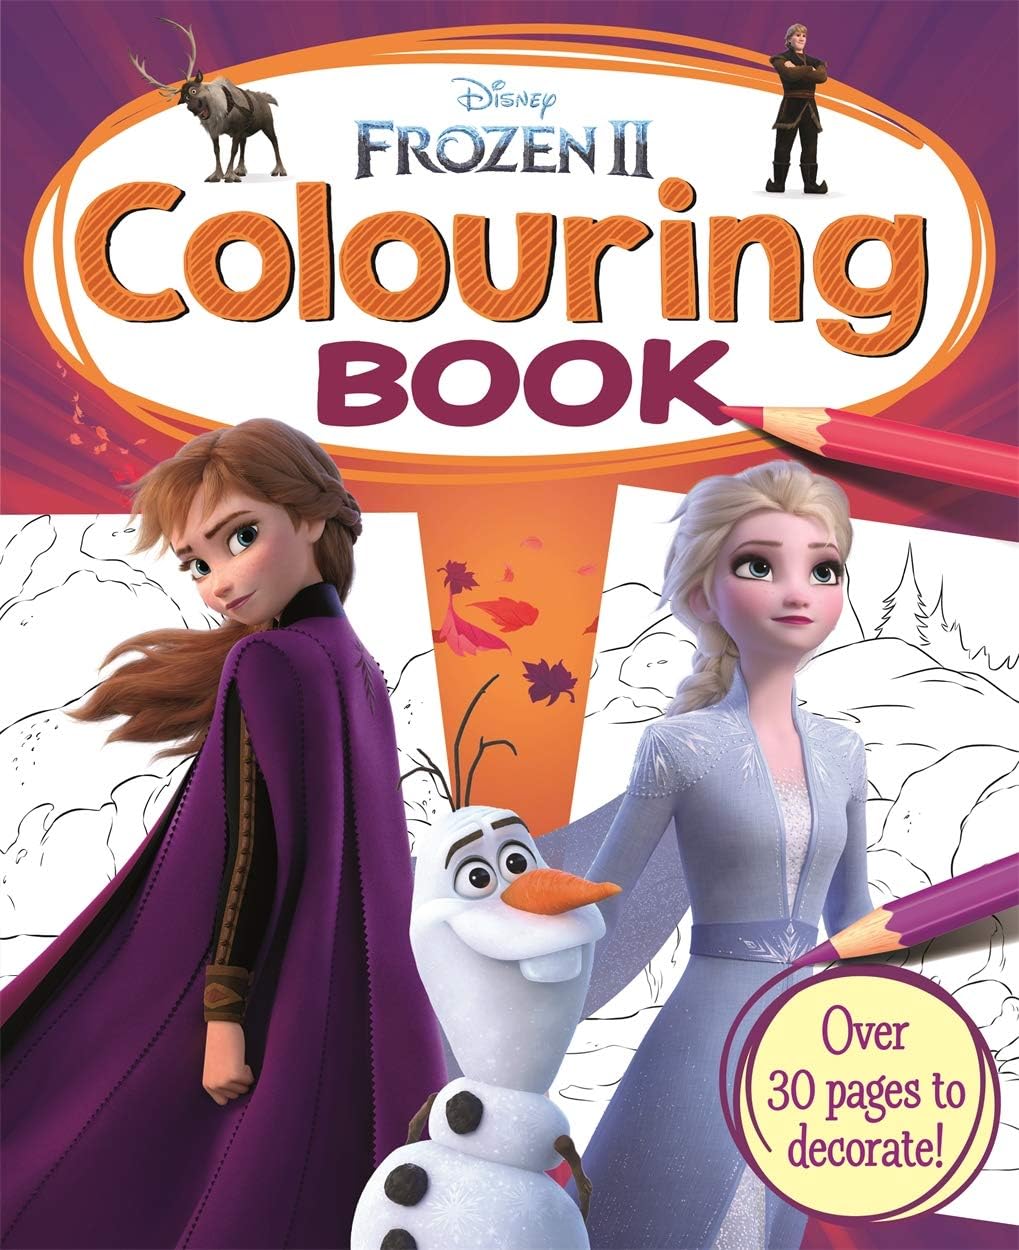 The Store - Disney: Frozen Adult Colouring Book - Book - The Store